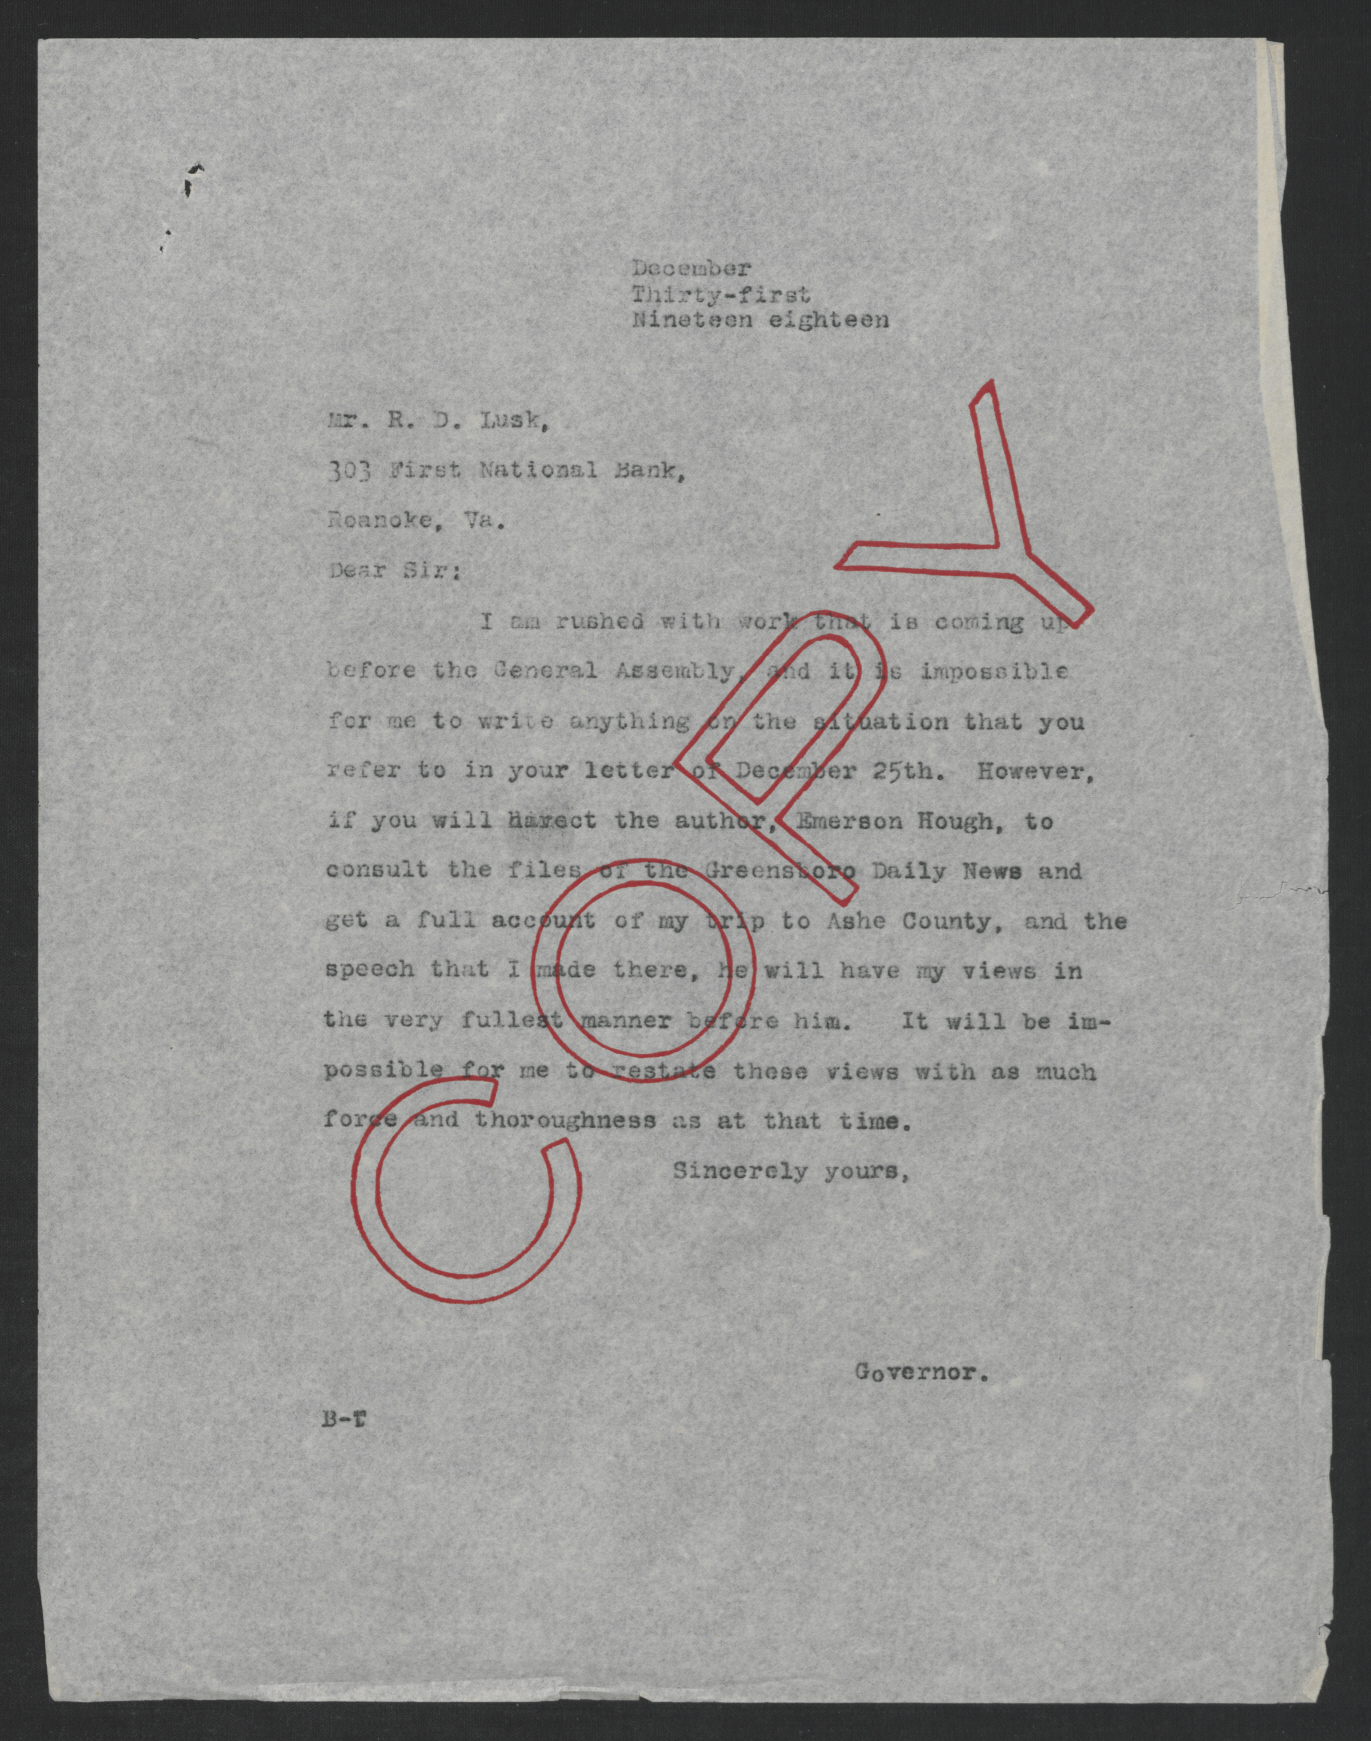 Letter from Thomas W. Bickett to Ralph D. Lusk, December 31, 1918